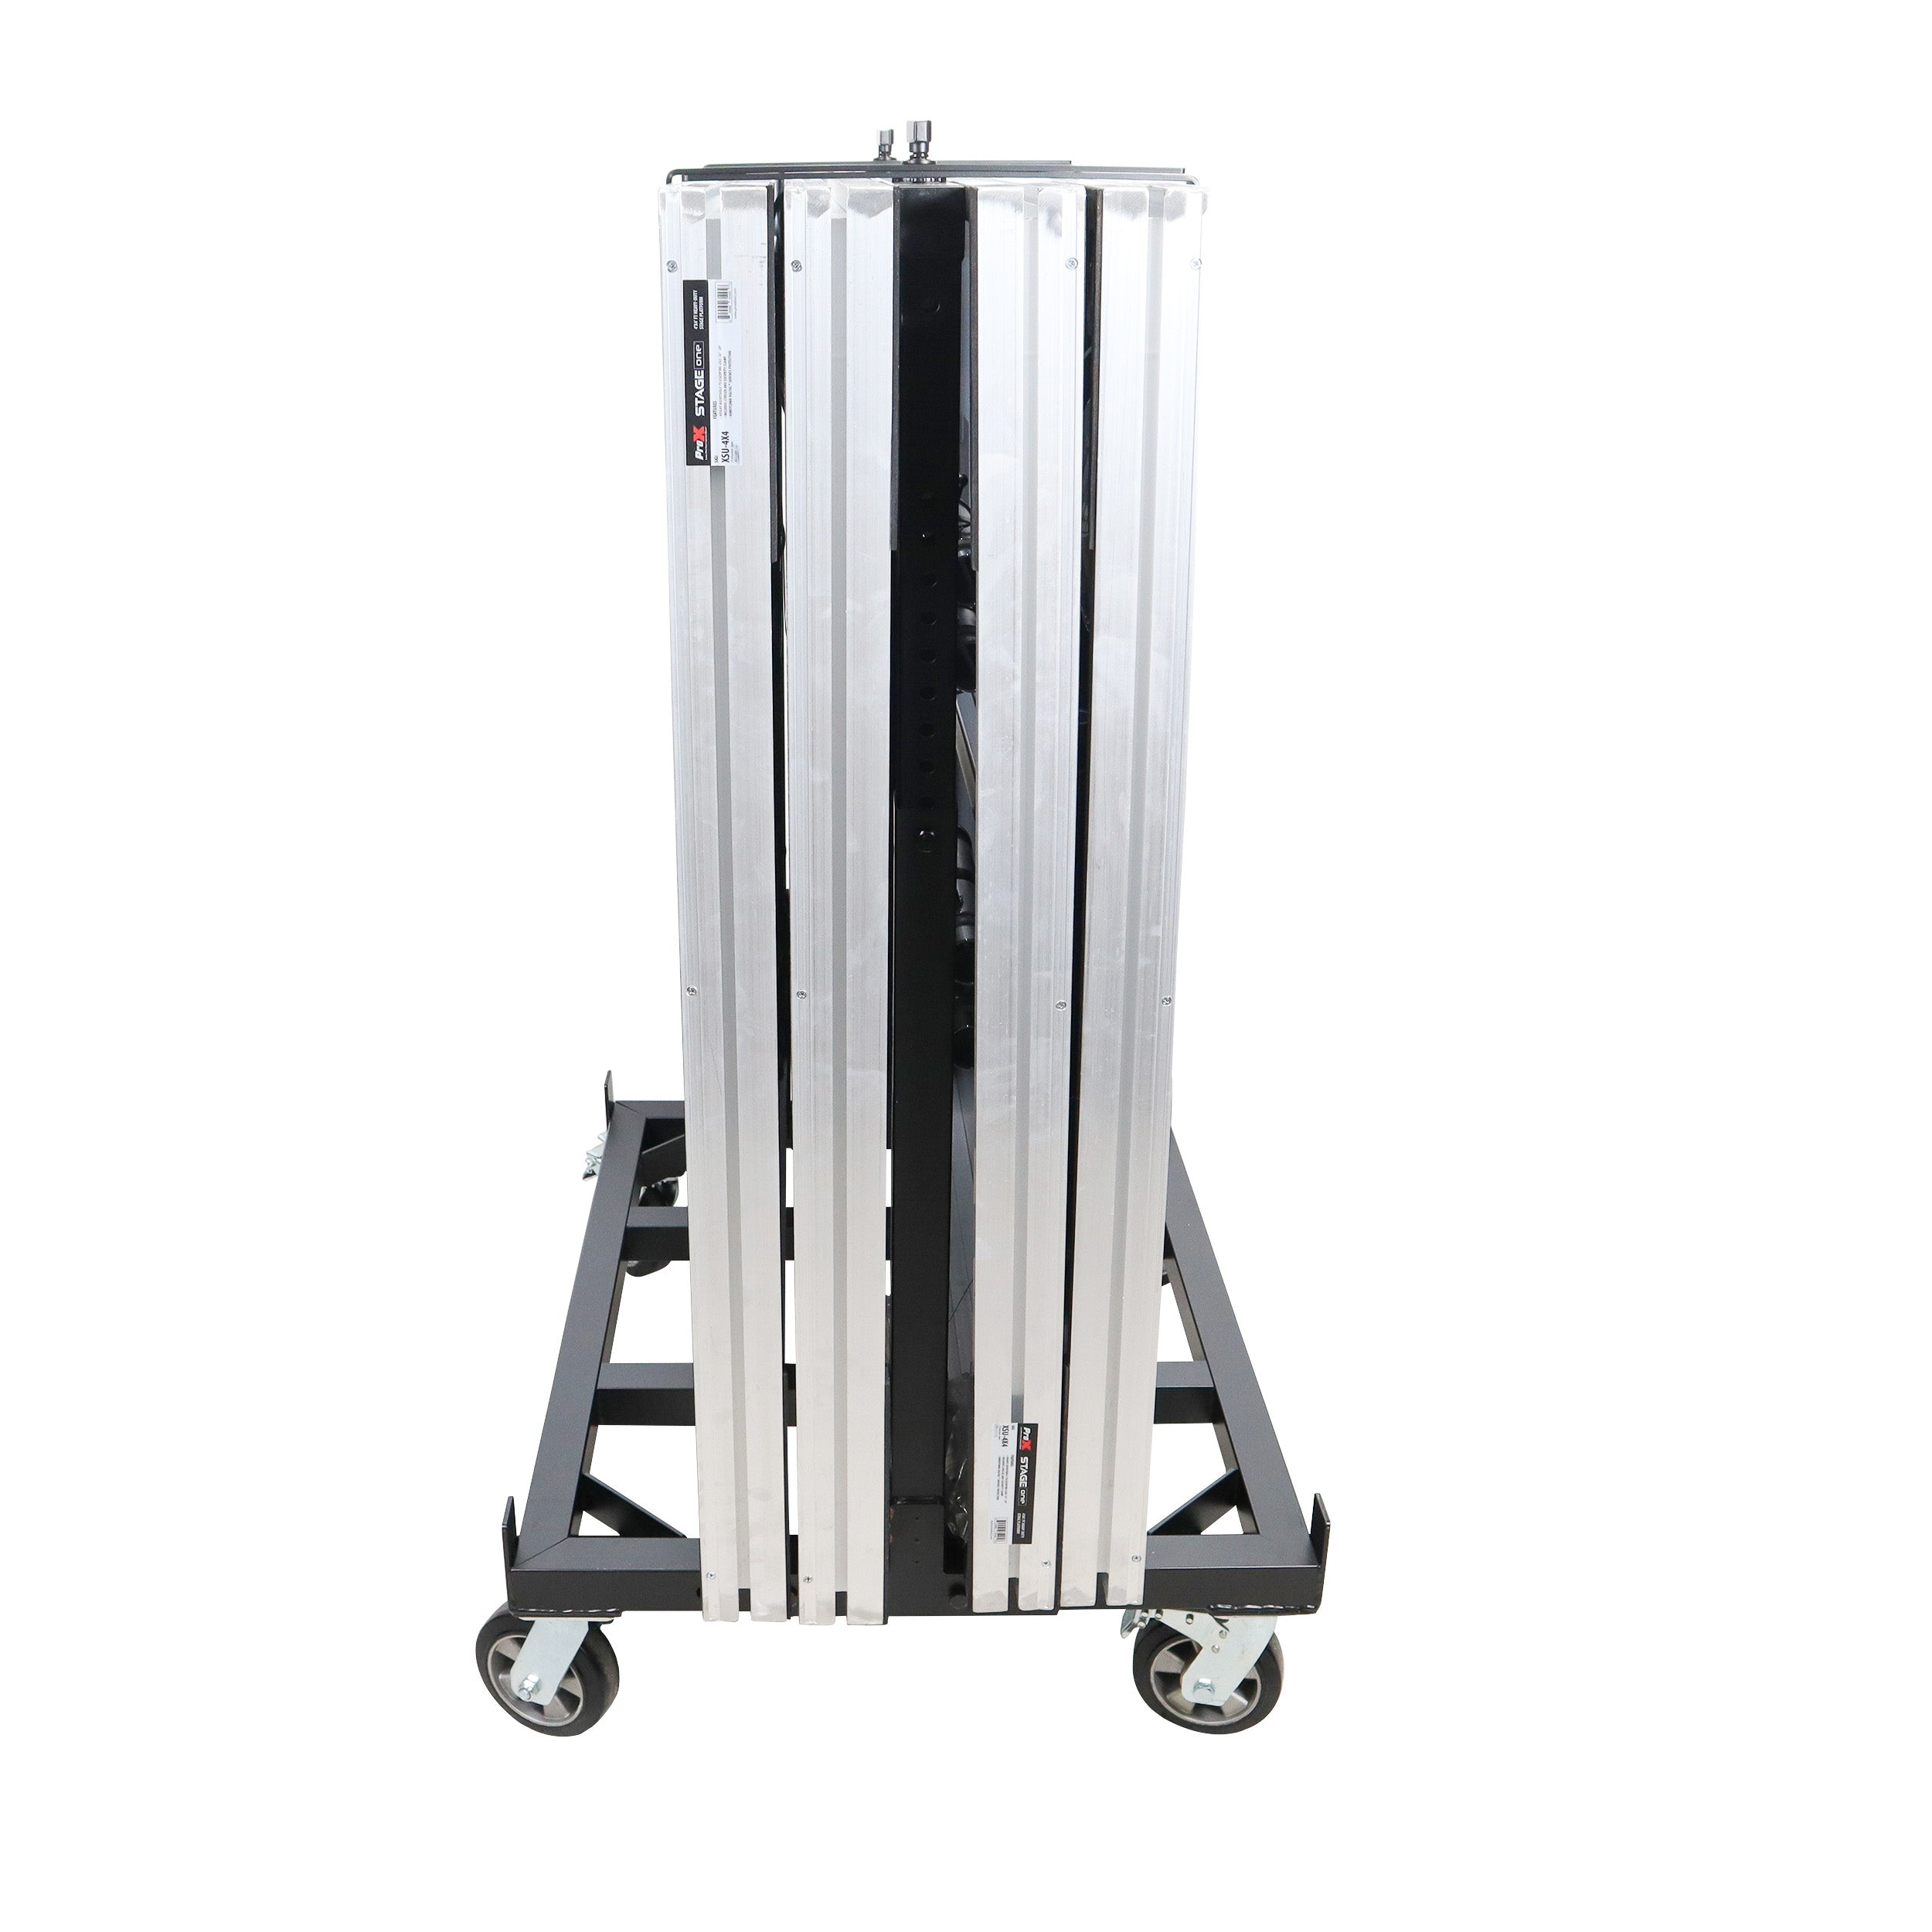 Pro X Universal Portable Rolling dolly for 4X4 and 4X8 Ft. Stage Platforms - Supports 6 to 8 Units